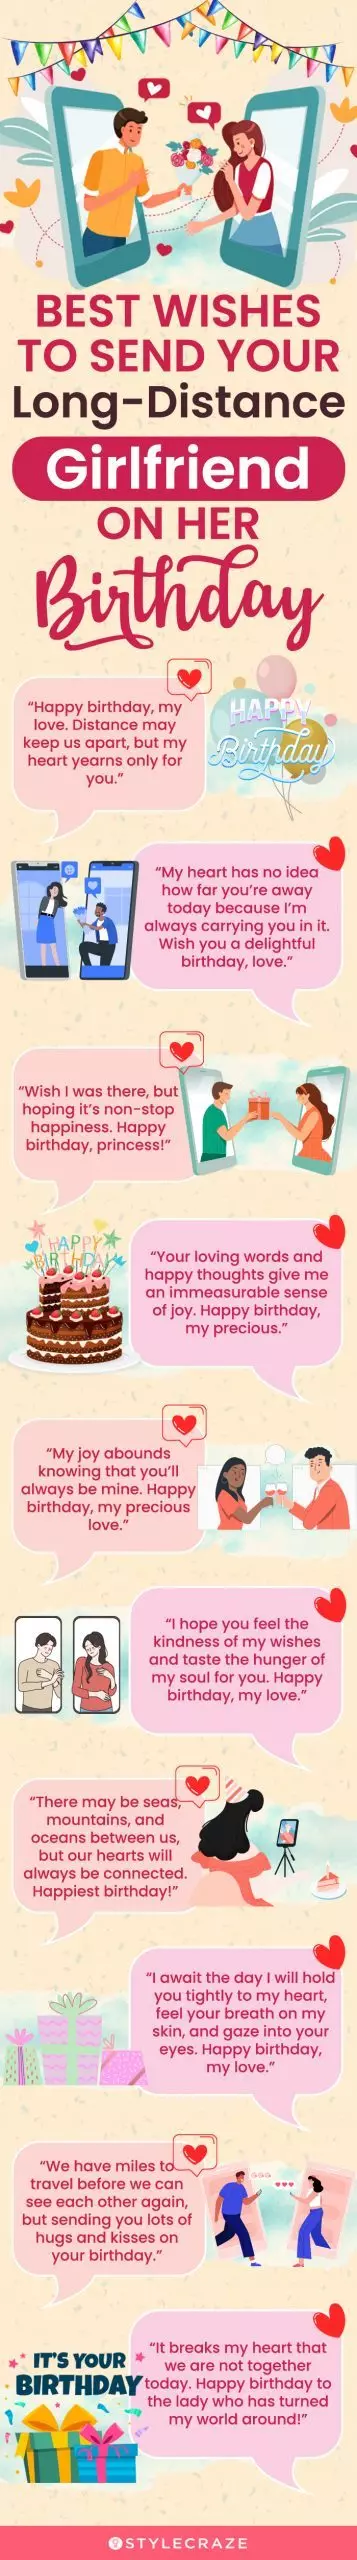 best wishes to send your long distance girlfriend on her birthday (infographic)